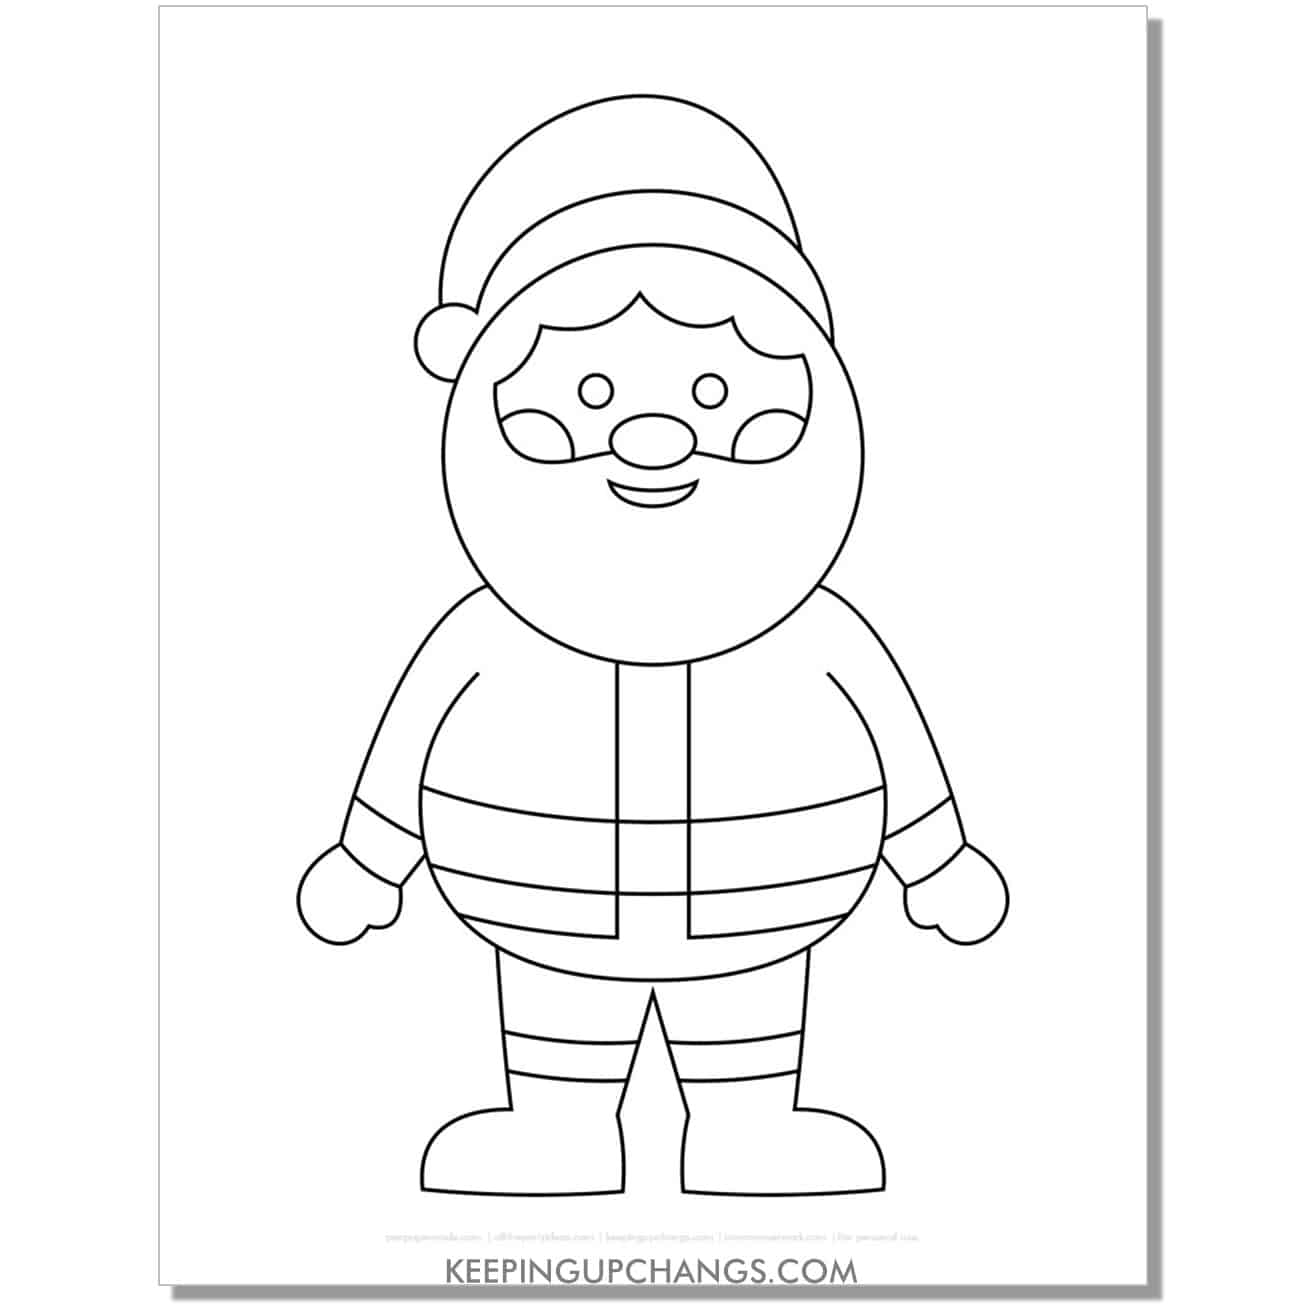 free big. large standing santa outline, cut out template in black and white.